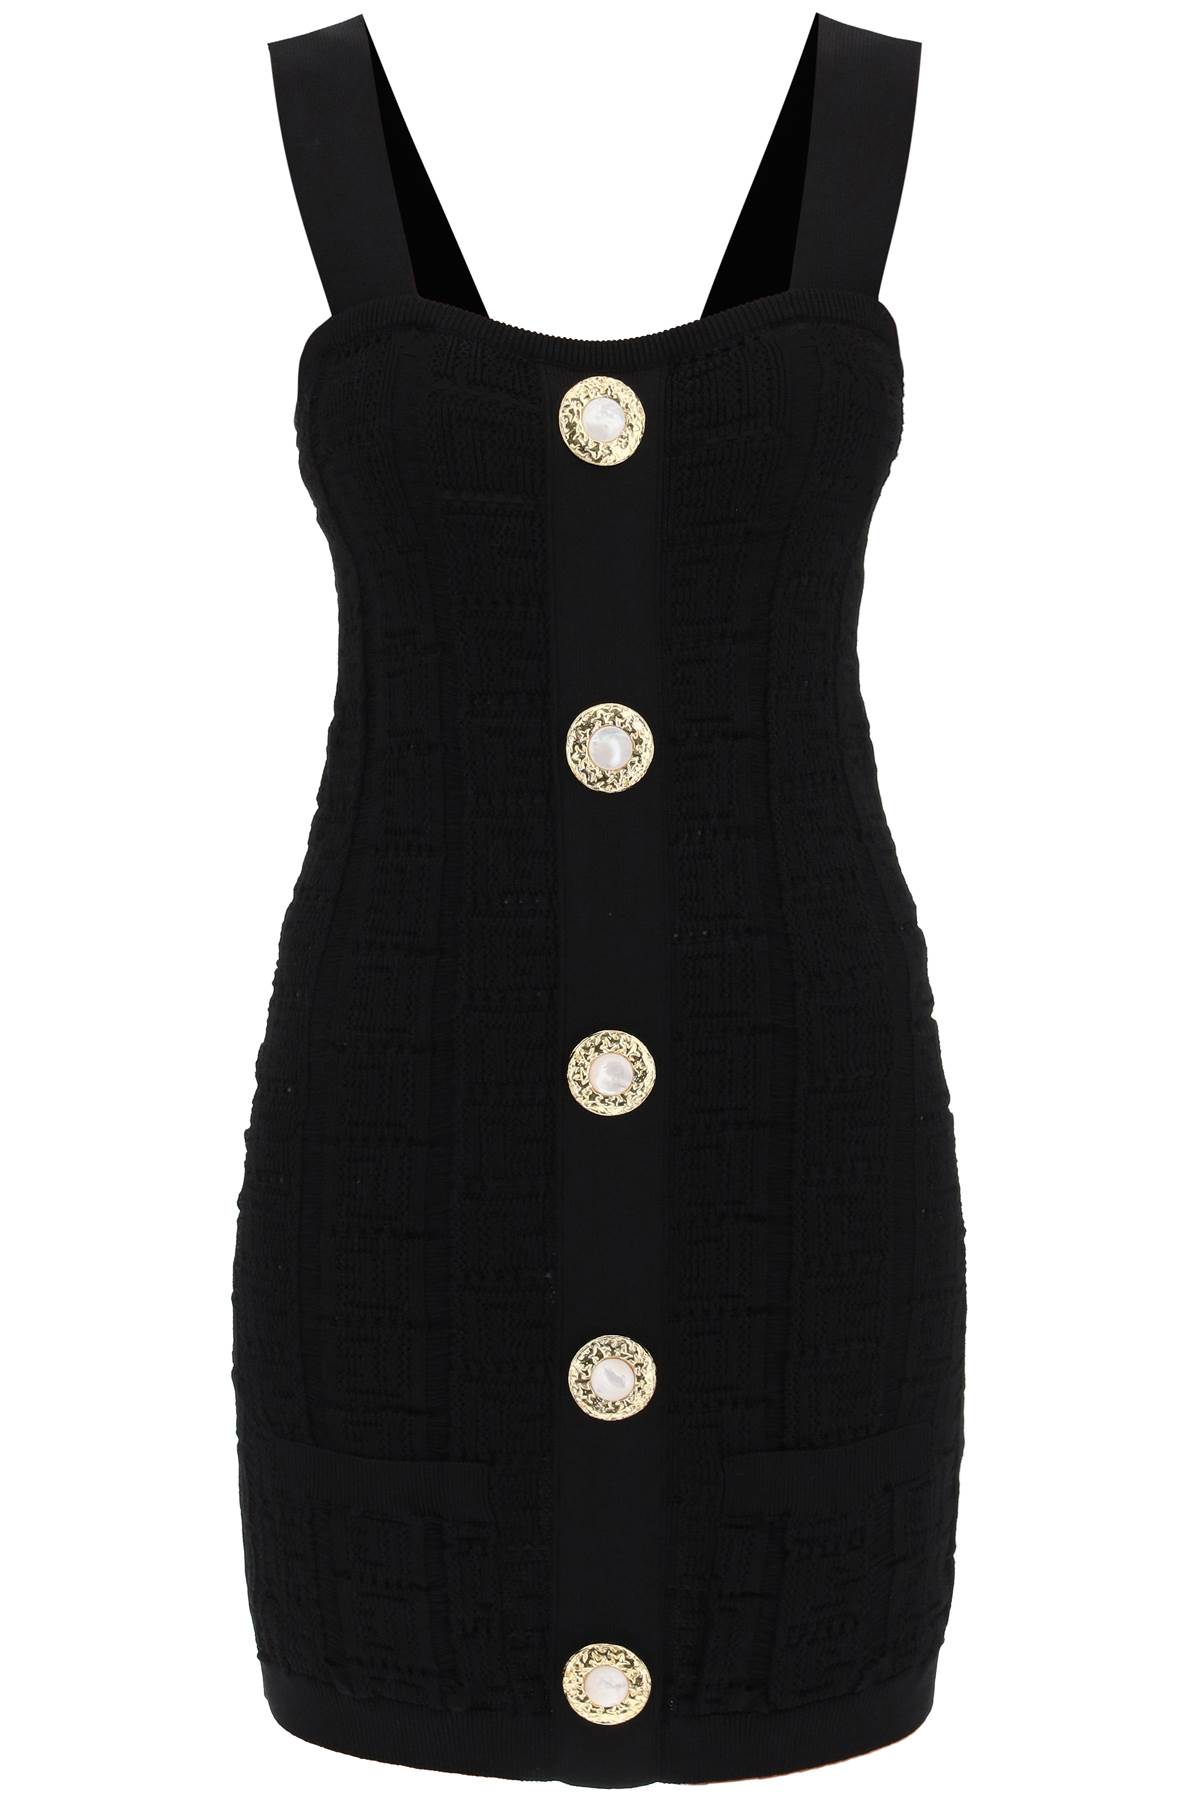 Balmain Knitted Mini Dress With Jewel Buttons